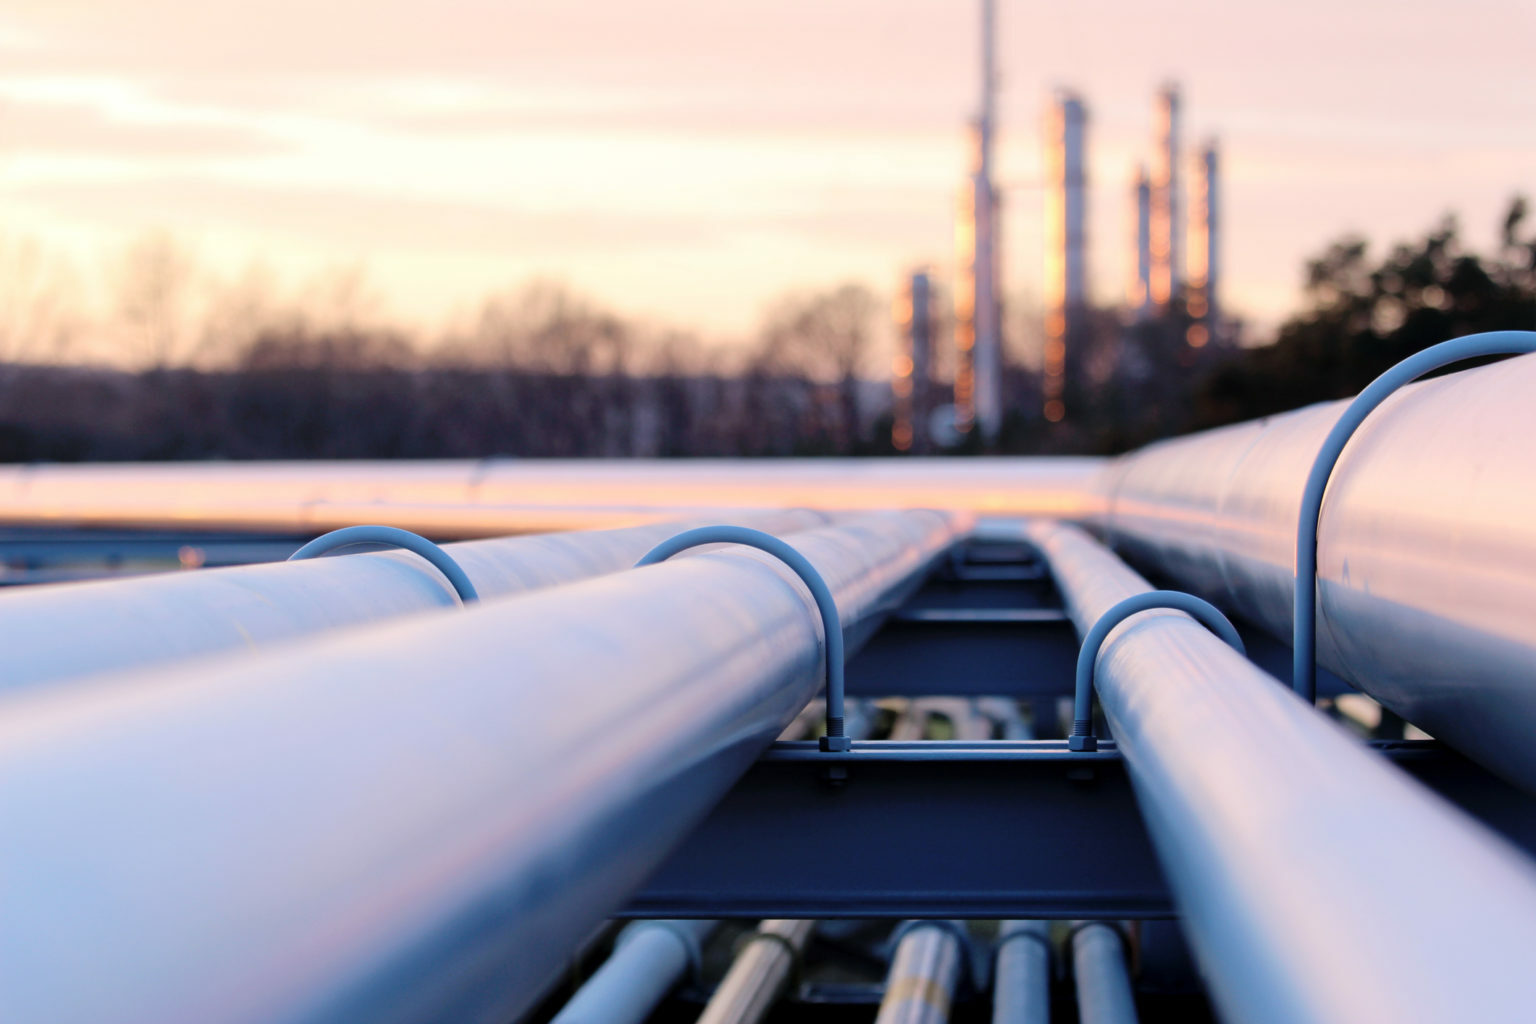 Court Rulings, Delays & Cancellations Underscore Challenges For Gas Pipeline Construction